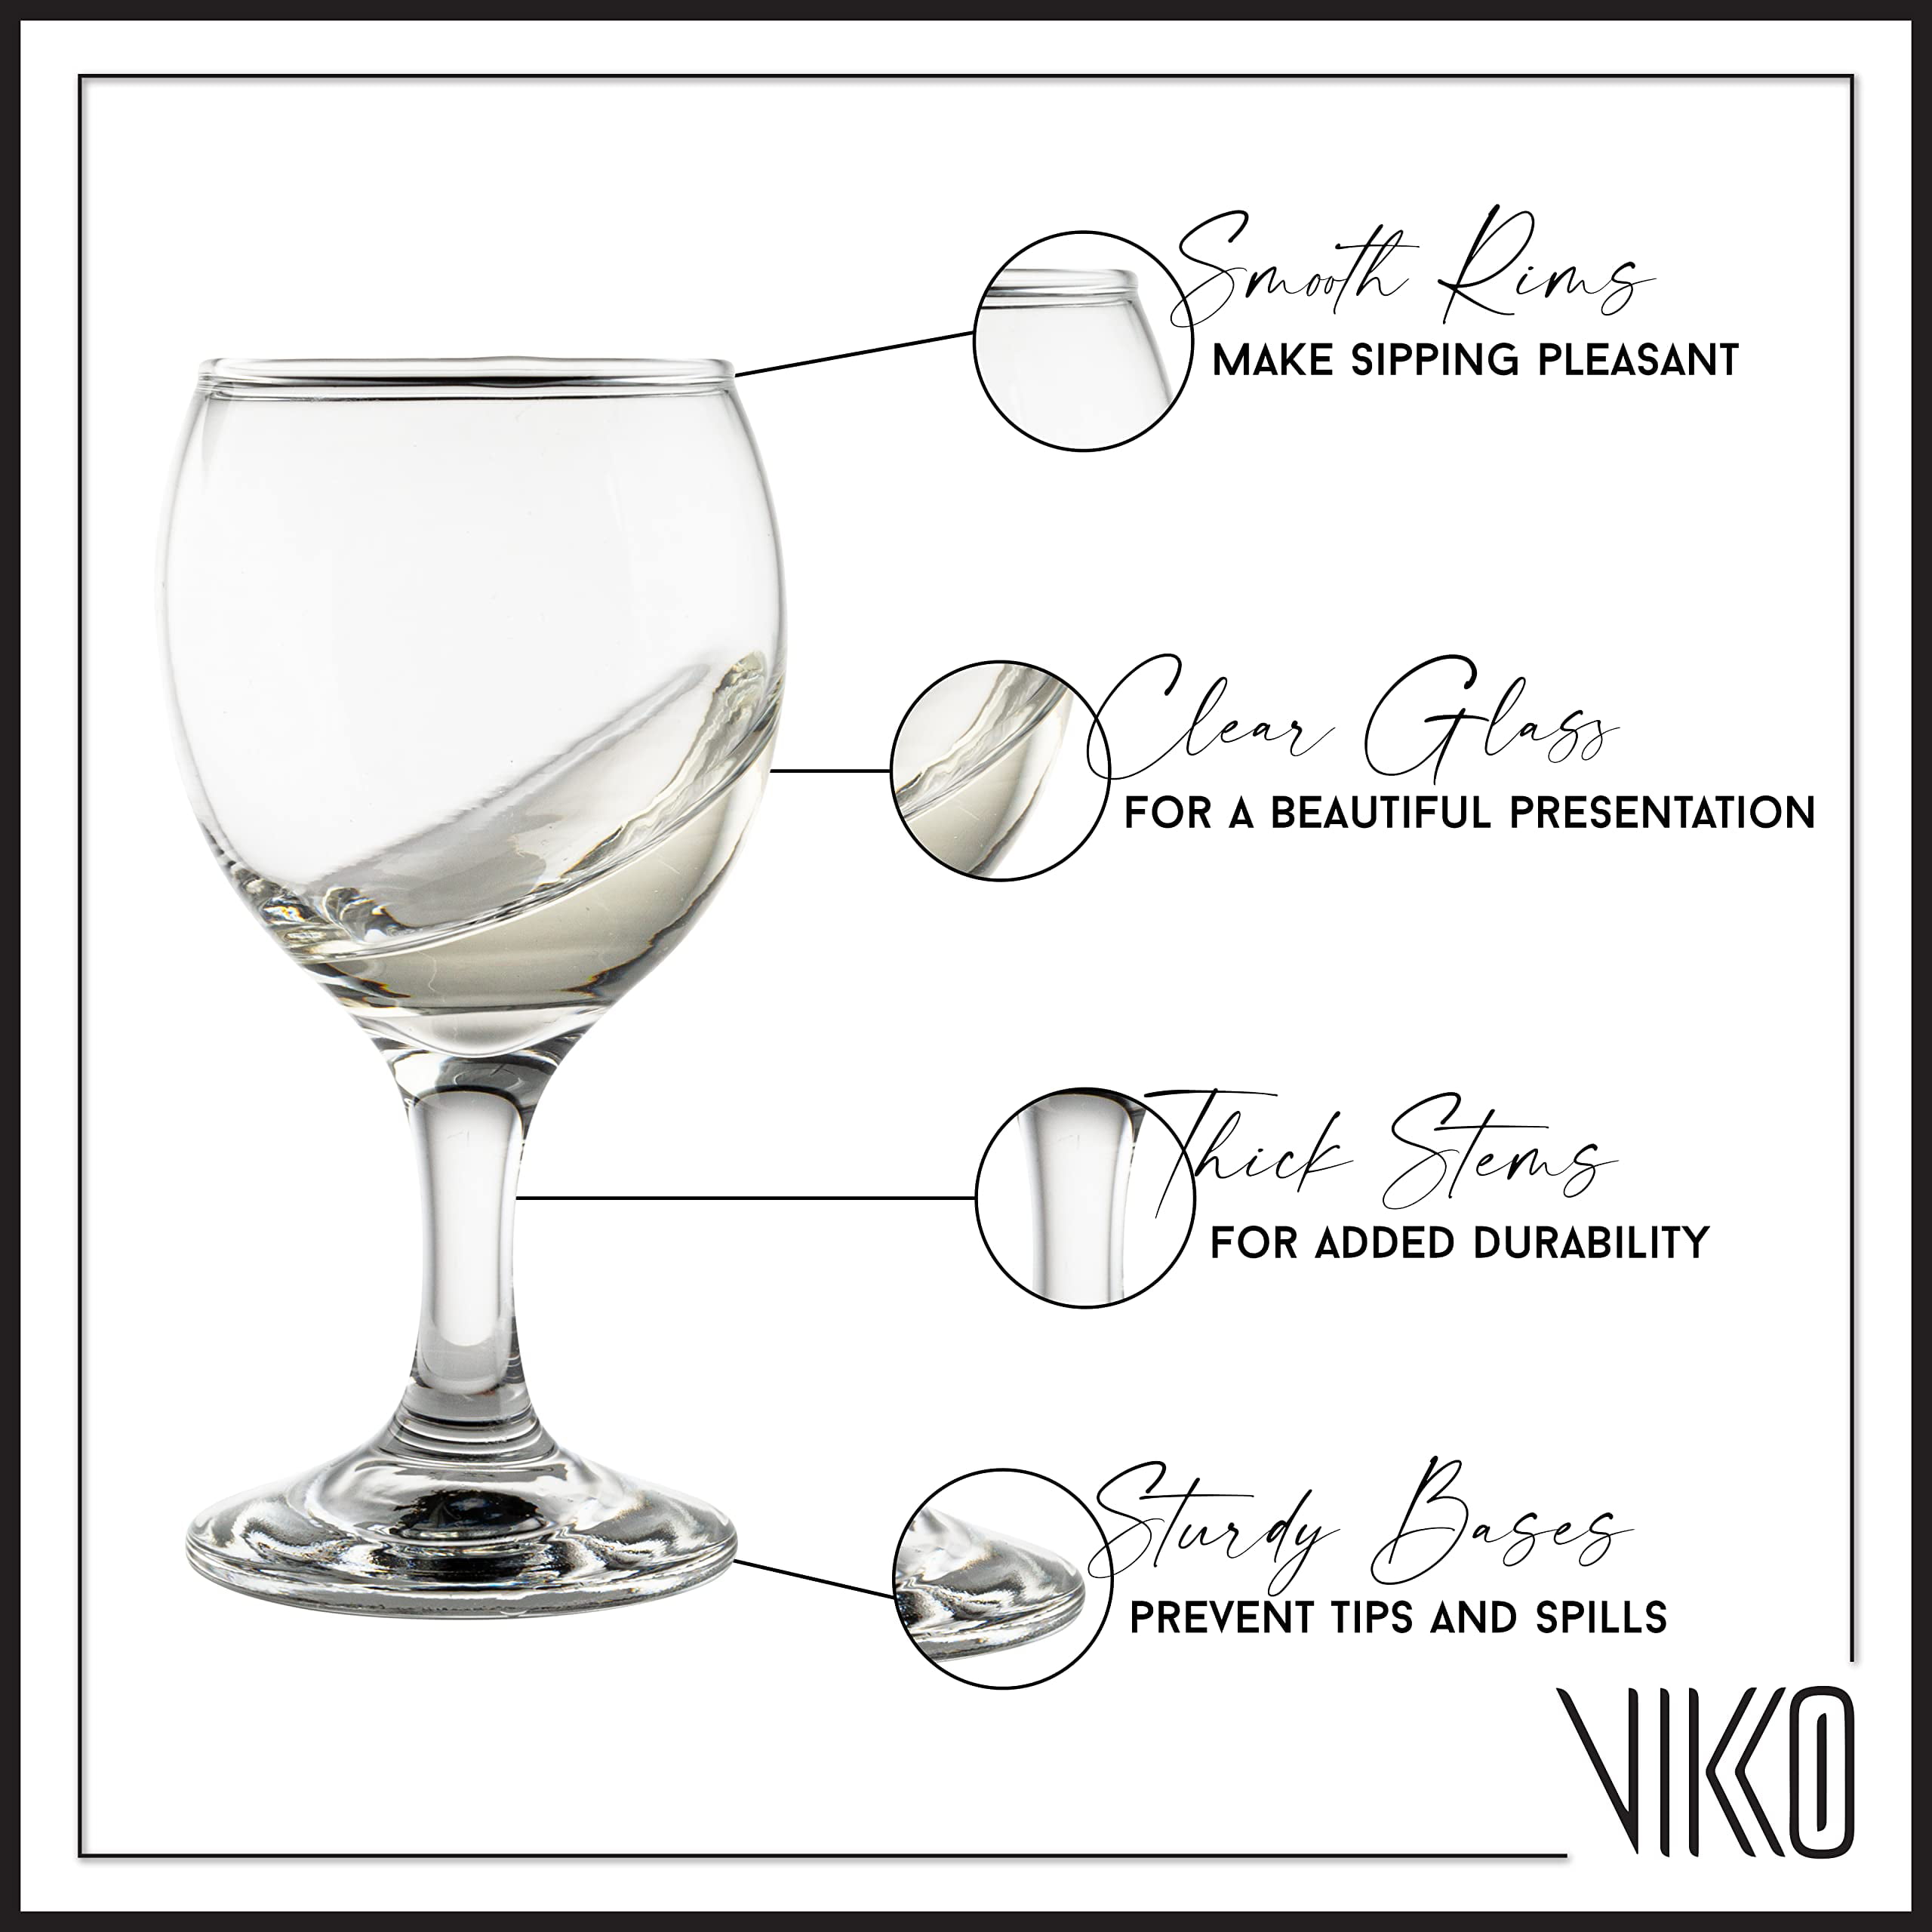 Madison Glossy White Colored Wine Glasses: Thick and Durable Dishwasher Safe 14 oz. 6 Glasses, Size: One Size